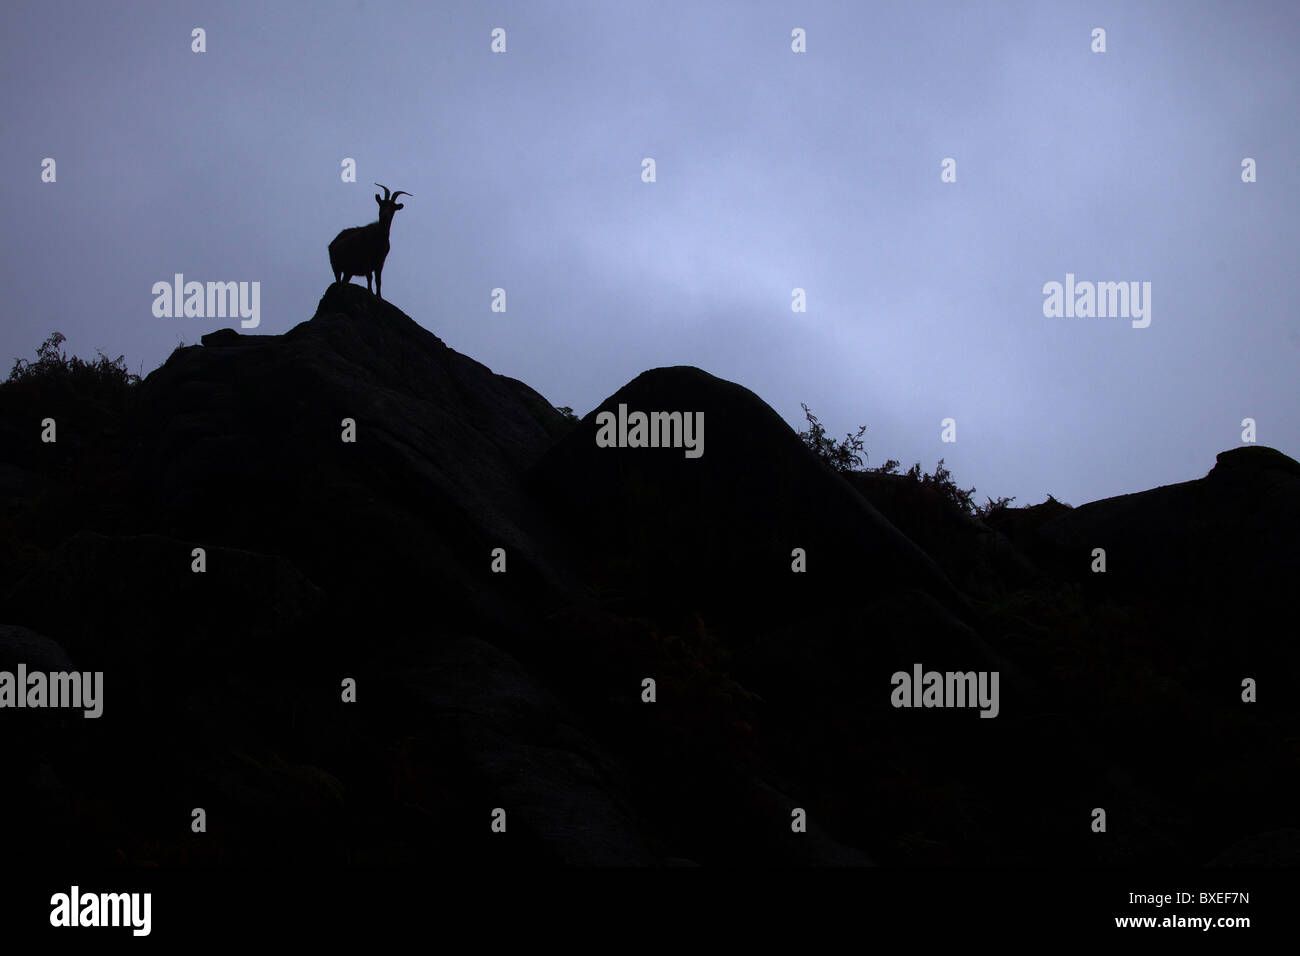 Wild goat stands alone on a high cliff on a cloudy day, Geres National Park, Portugal Stock Photo